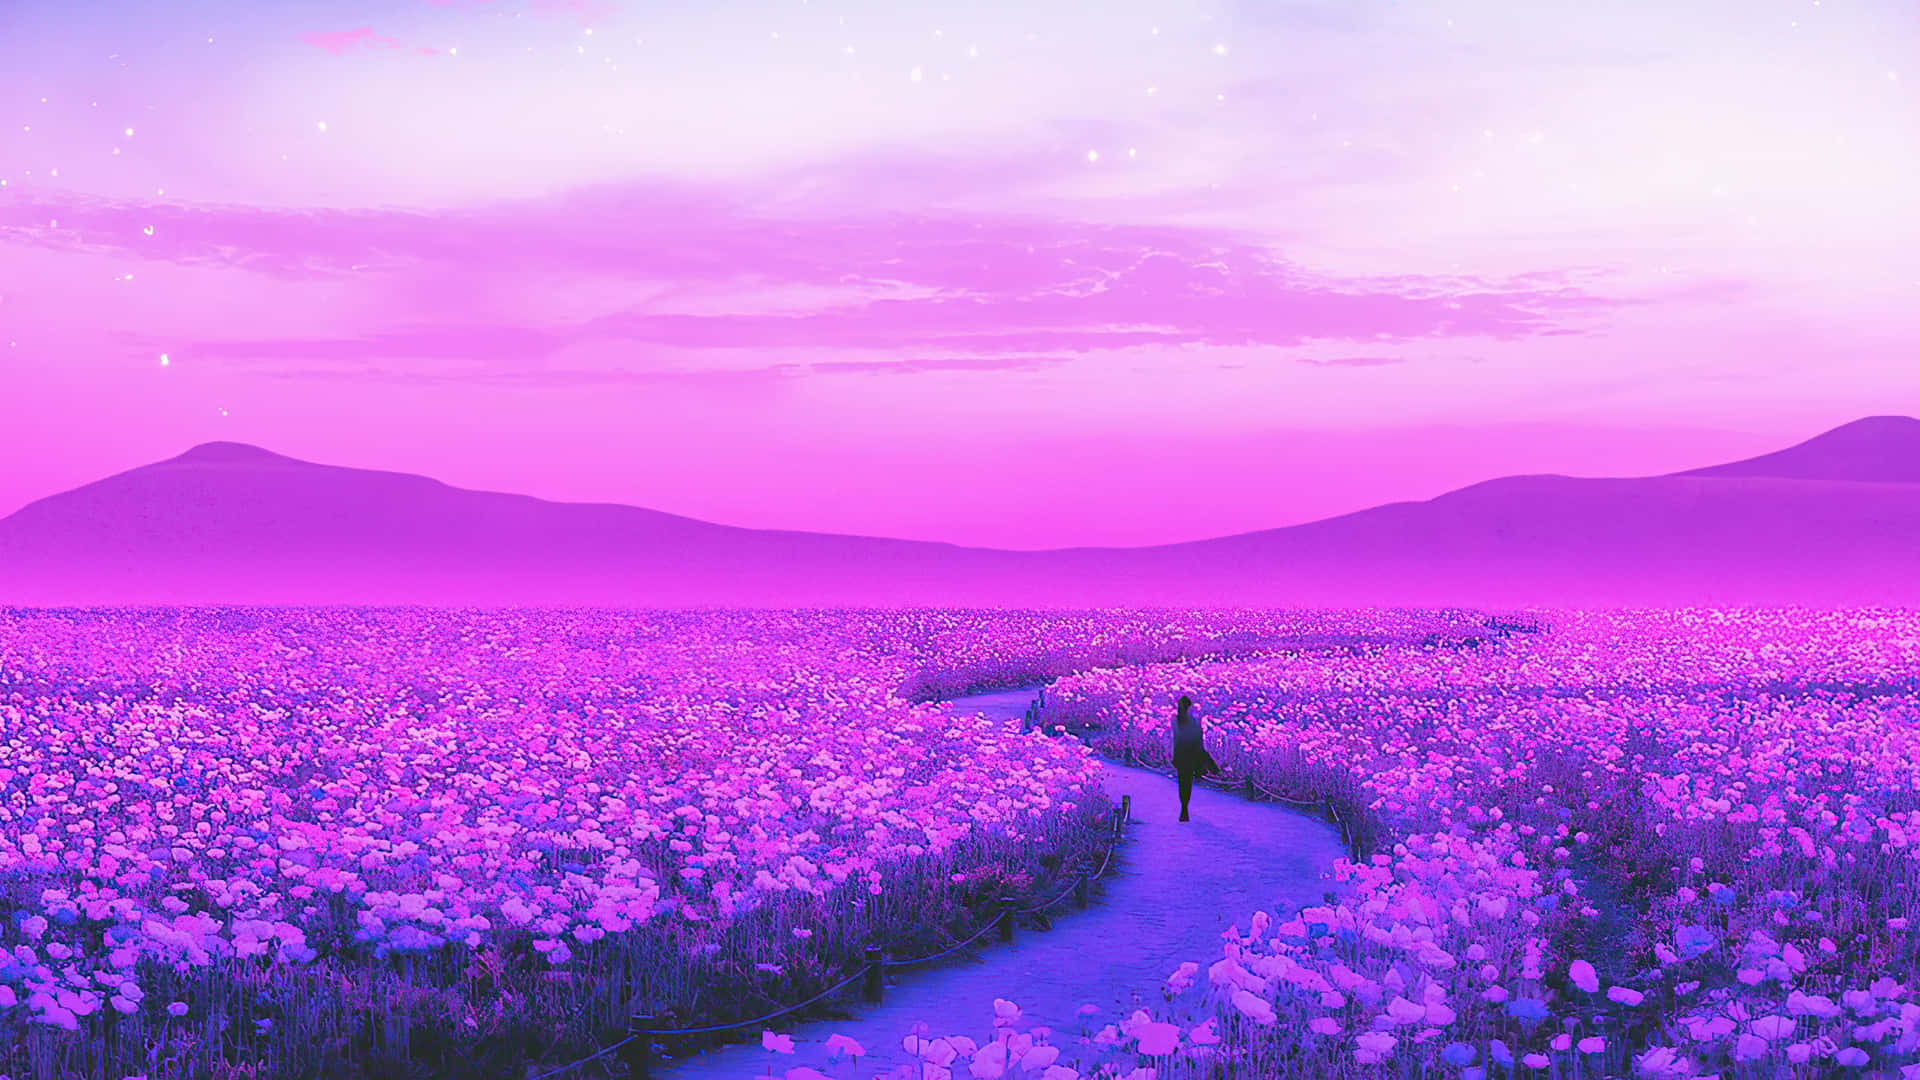 "Take a walk through the stunning lavender field and marvel at its beauty" Wallpaper